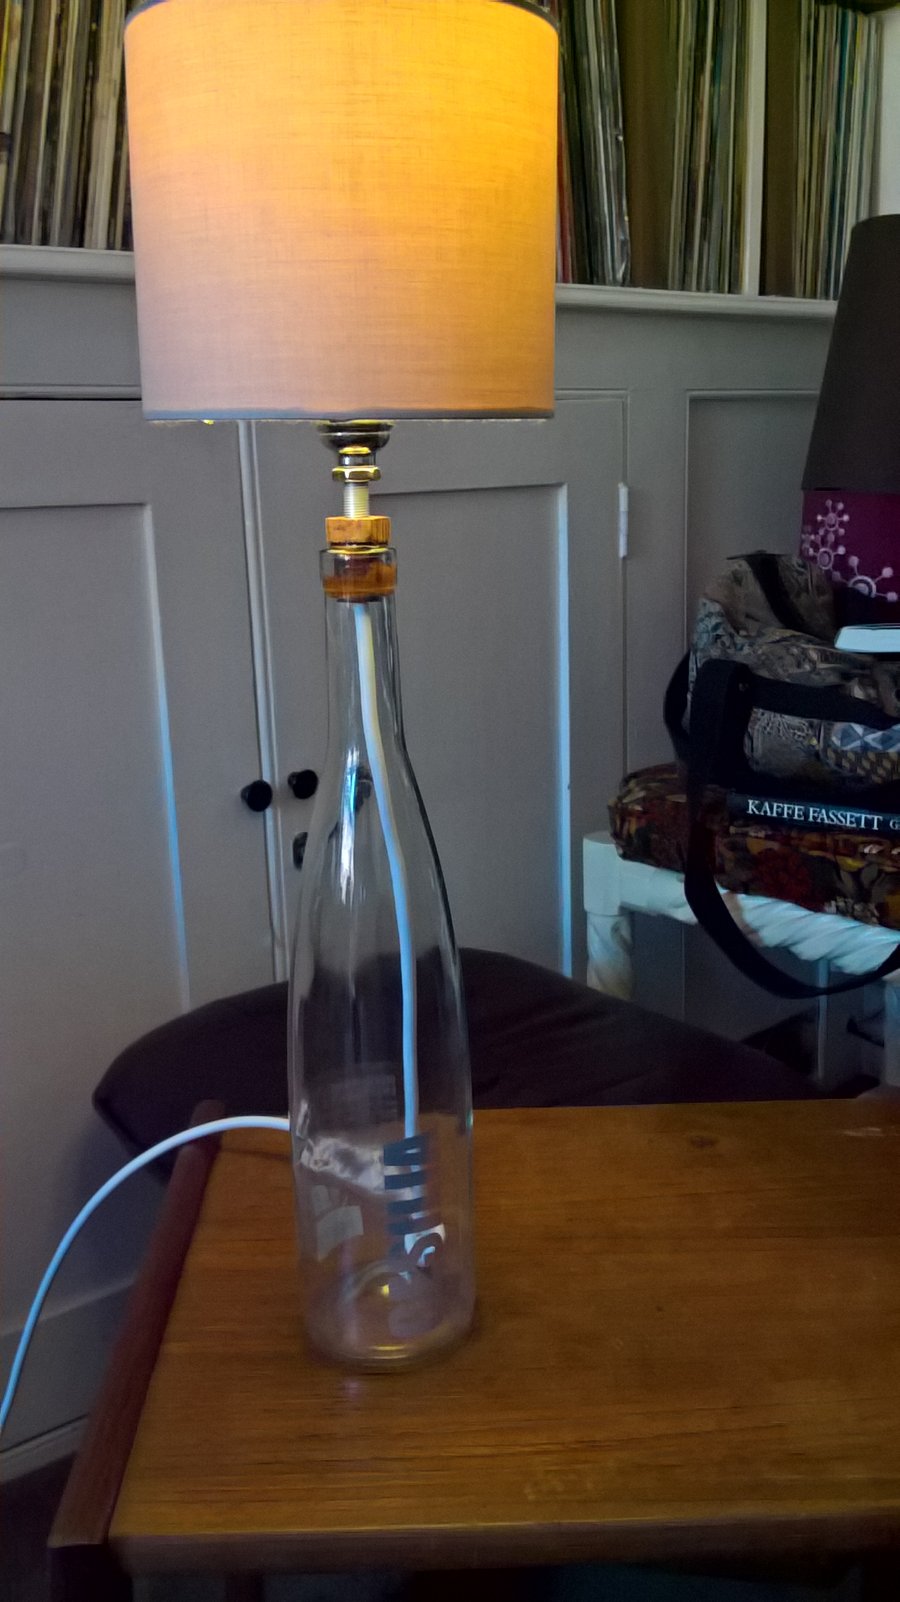 White wine bottle pop art lamp shade (Bulb and shade NOT included)